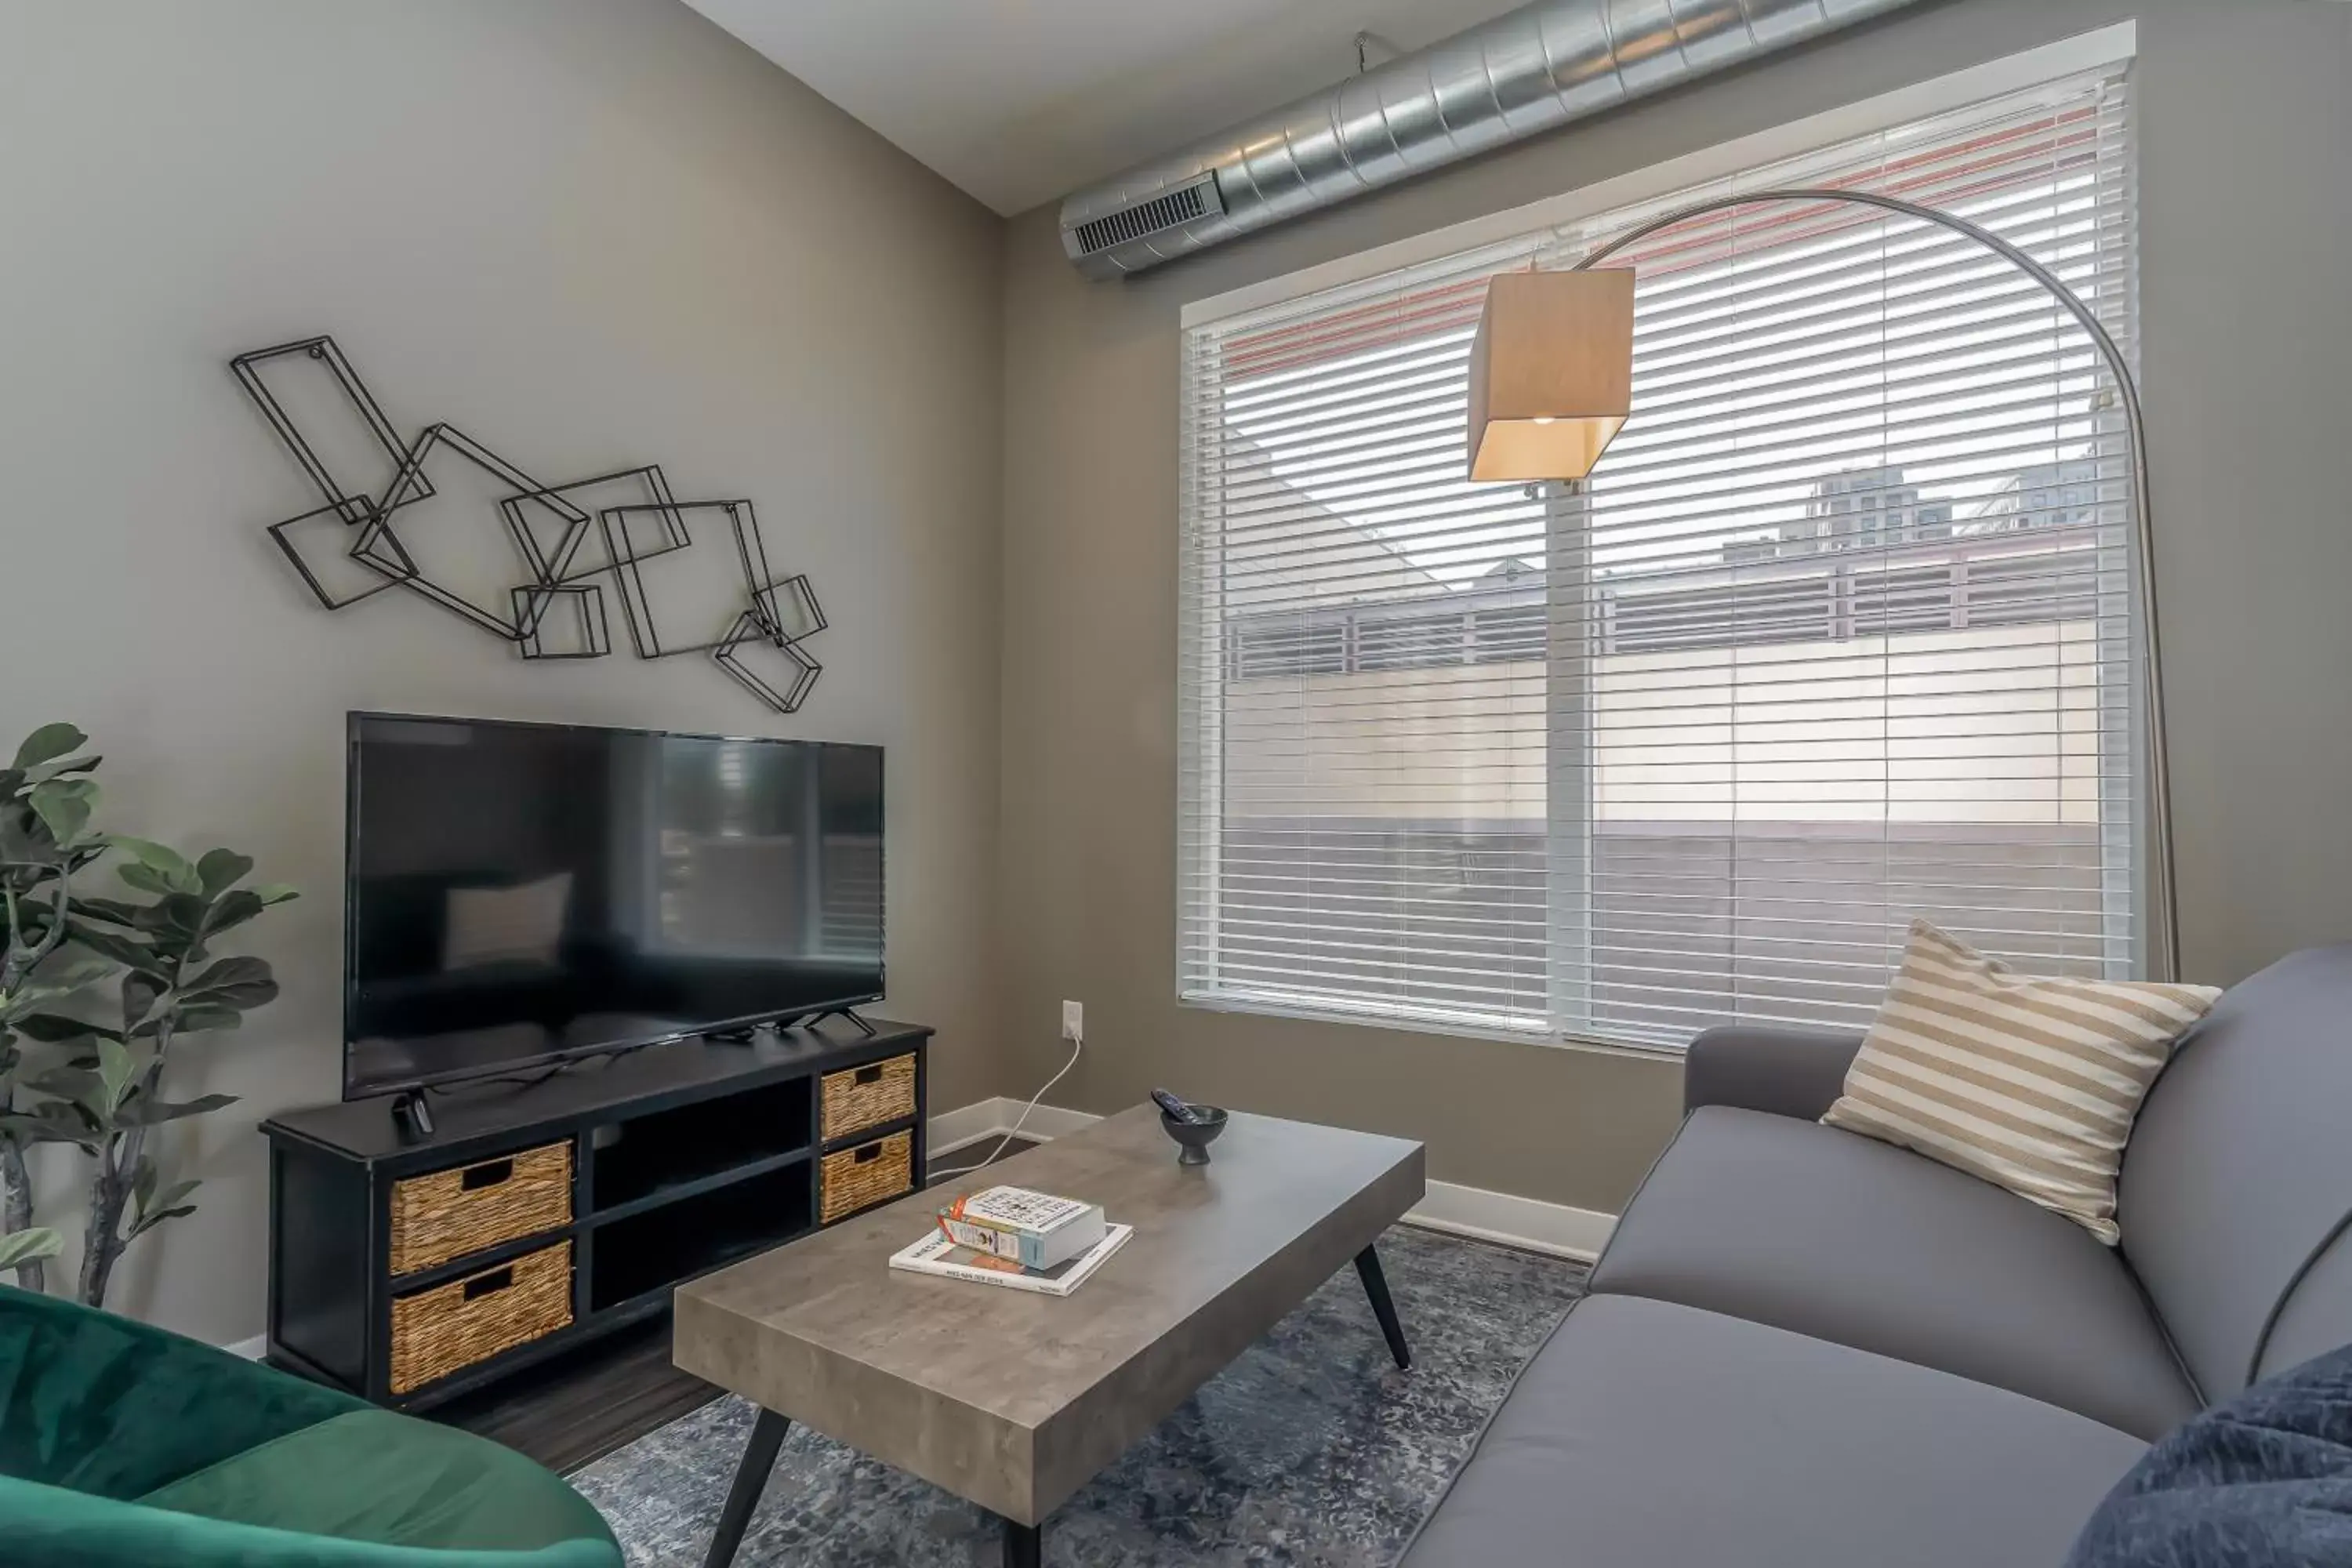 One-Bedroom Apartment (Self Check-in with Virtual Front Desk) in Kasa Downtown Des Moines